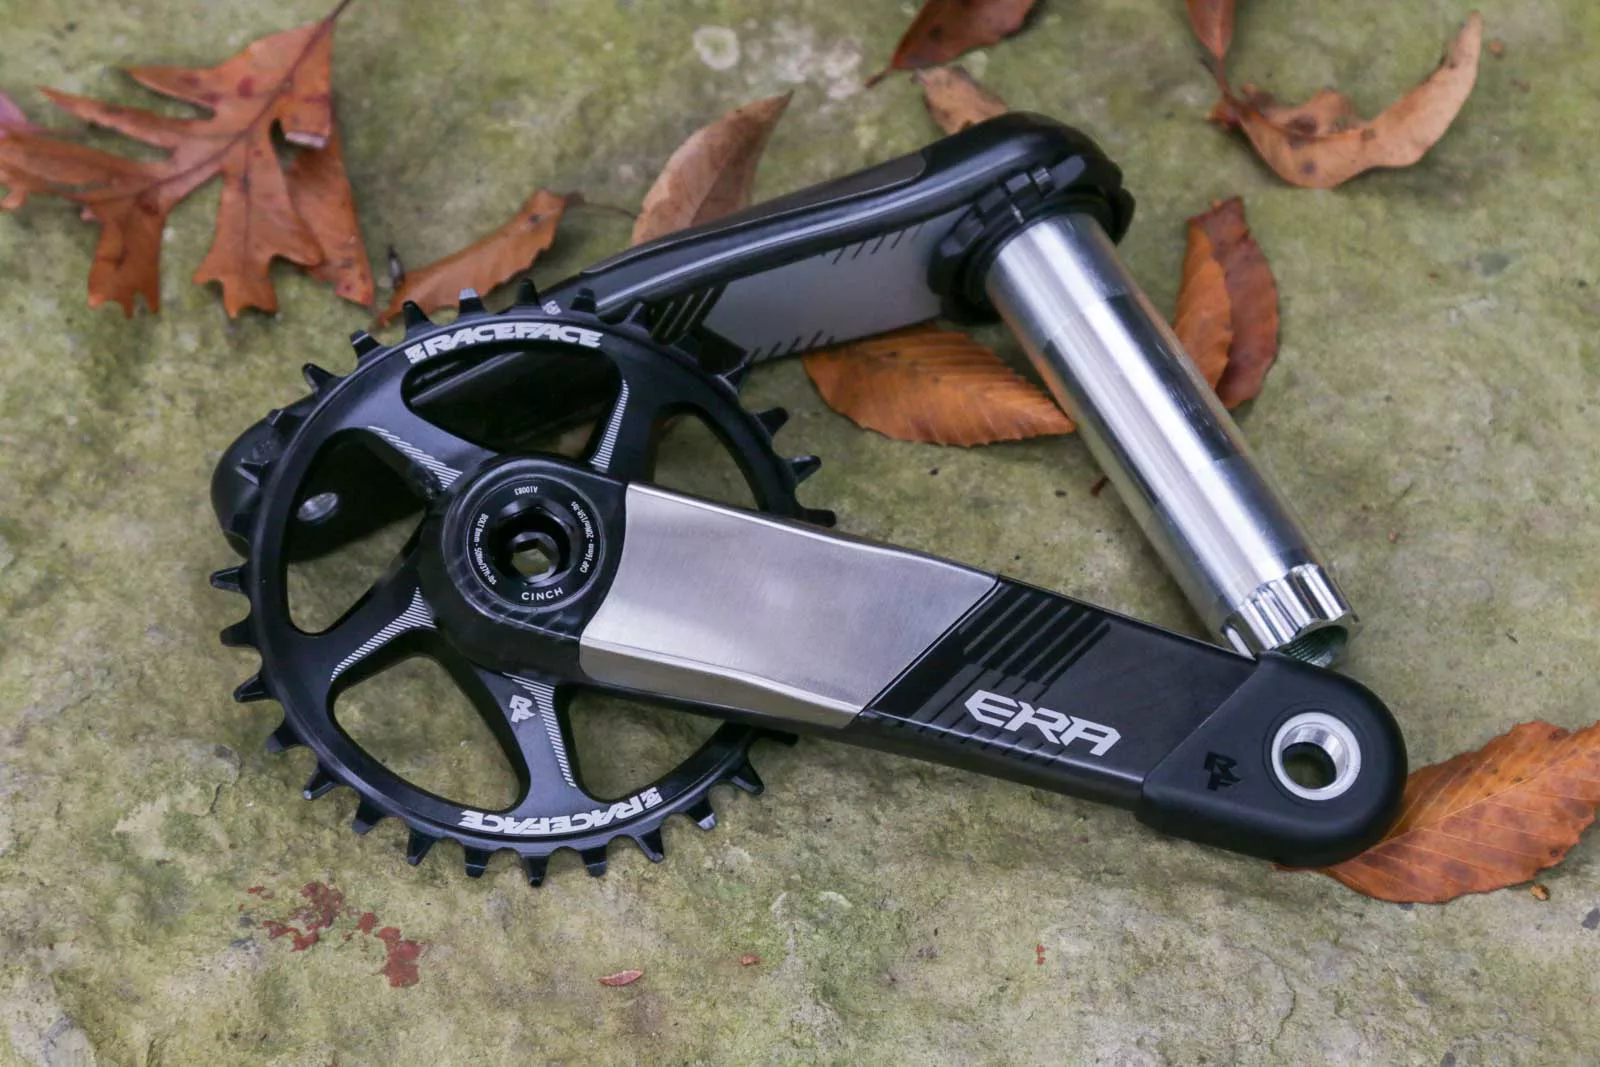 New Race Face Era Carbon Cranks Add Stainless Heel Guard +